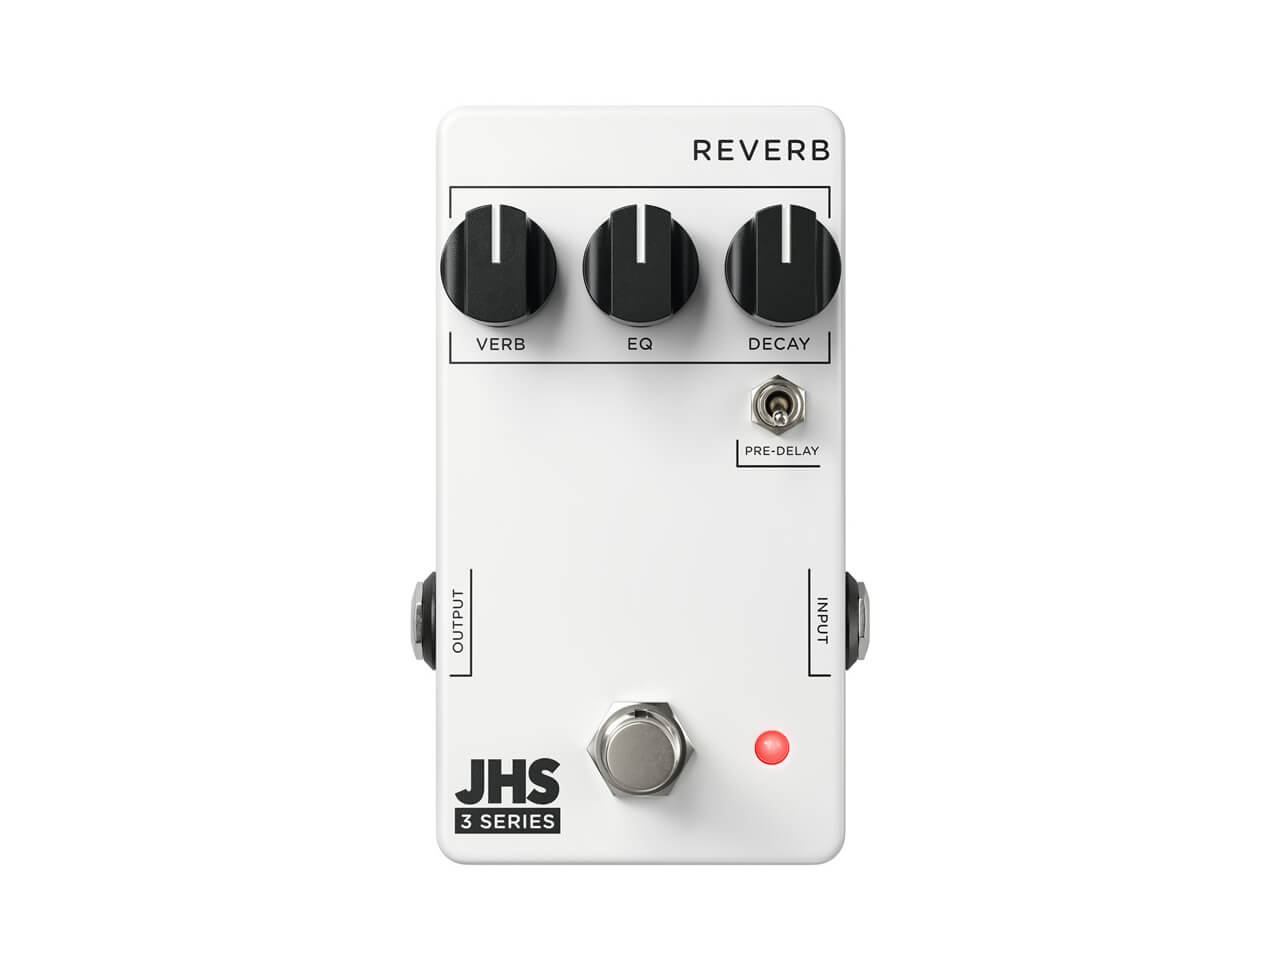 JHS Pedals 3 Series REVERB<br>(リバーブ)(ジェイエイチエスペダルズ) 駅前店